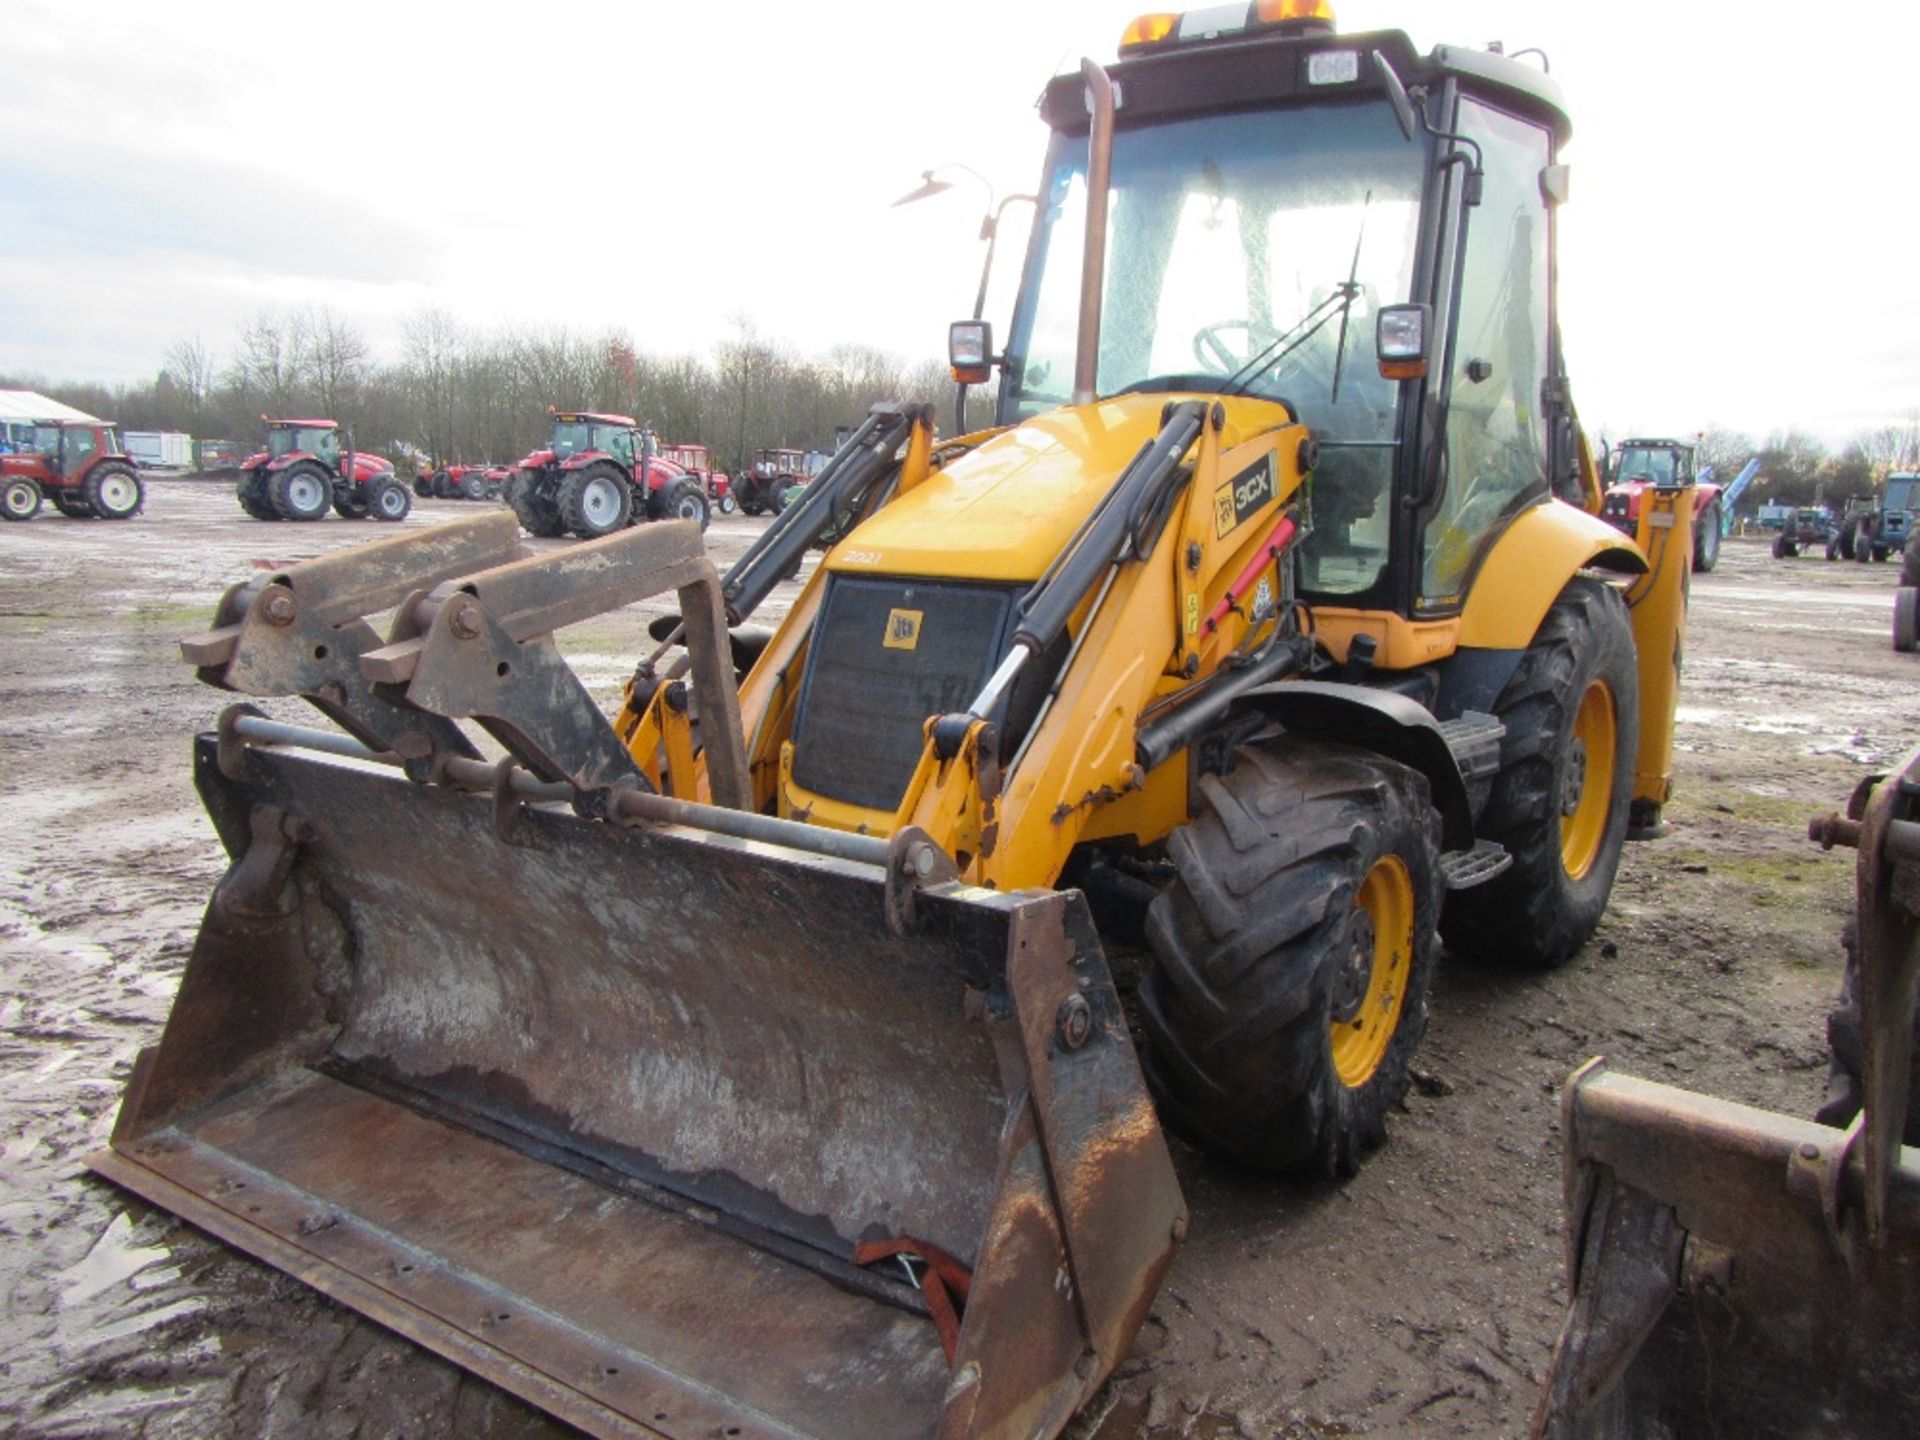 2008 JCB 3CX Contractor c/w Turbo, SRS, Hydraulic Quick Hitch, 4 in 1 Bucket, Forks, Torque Lock